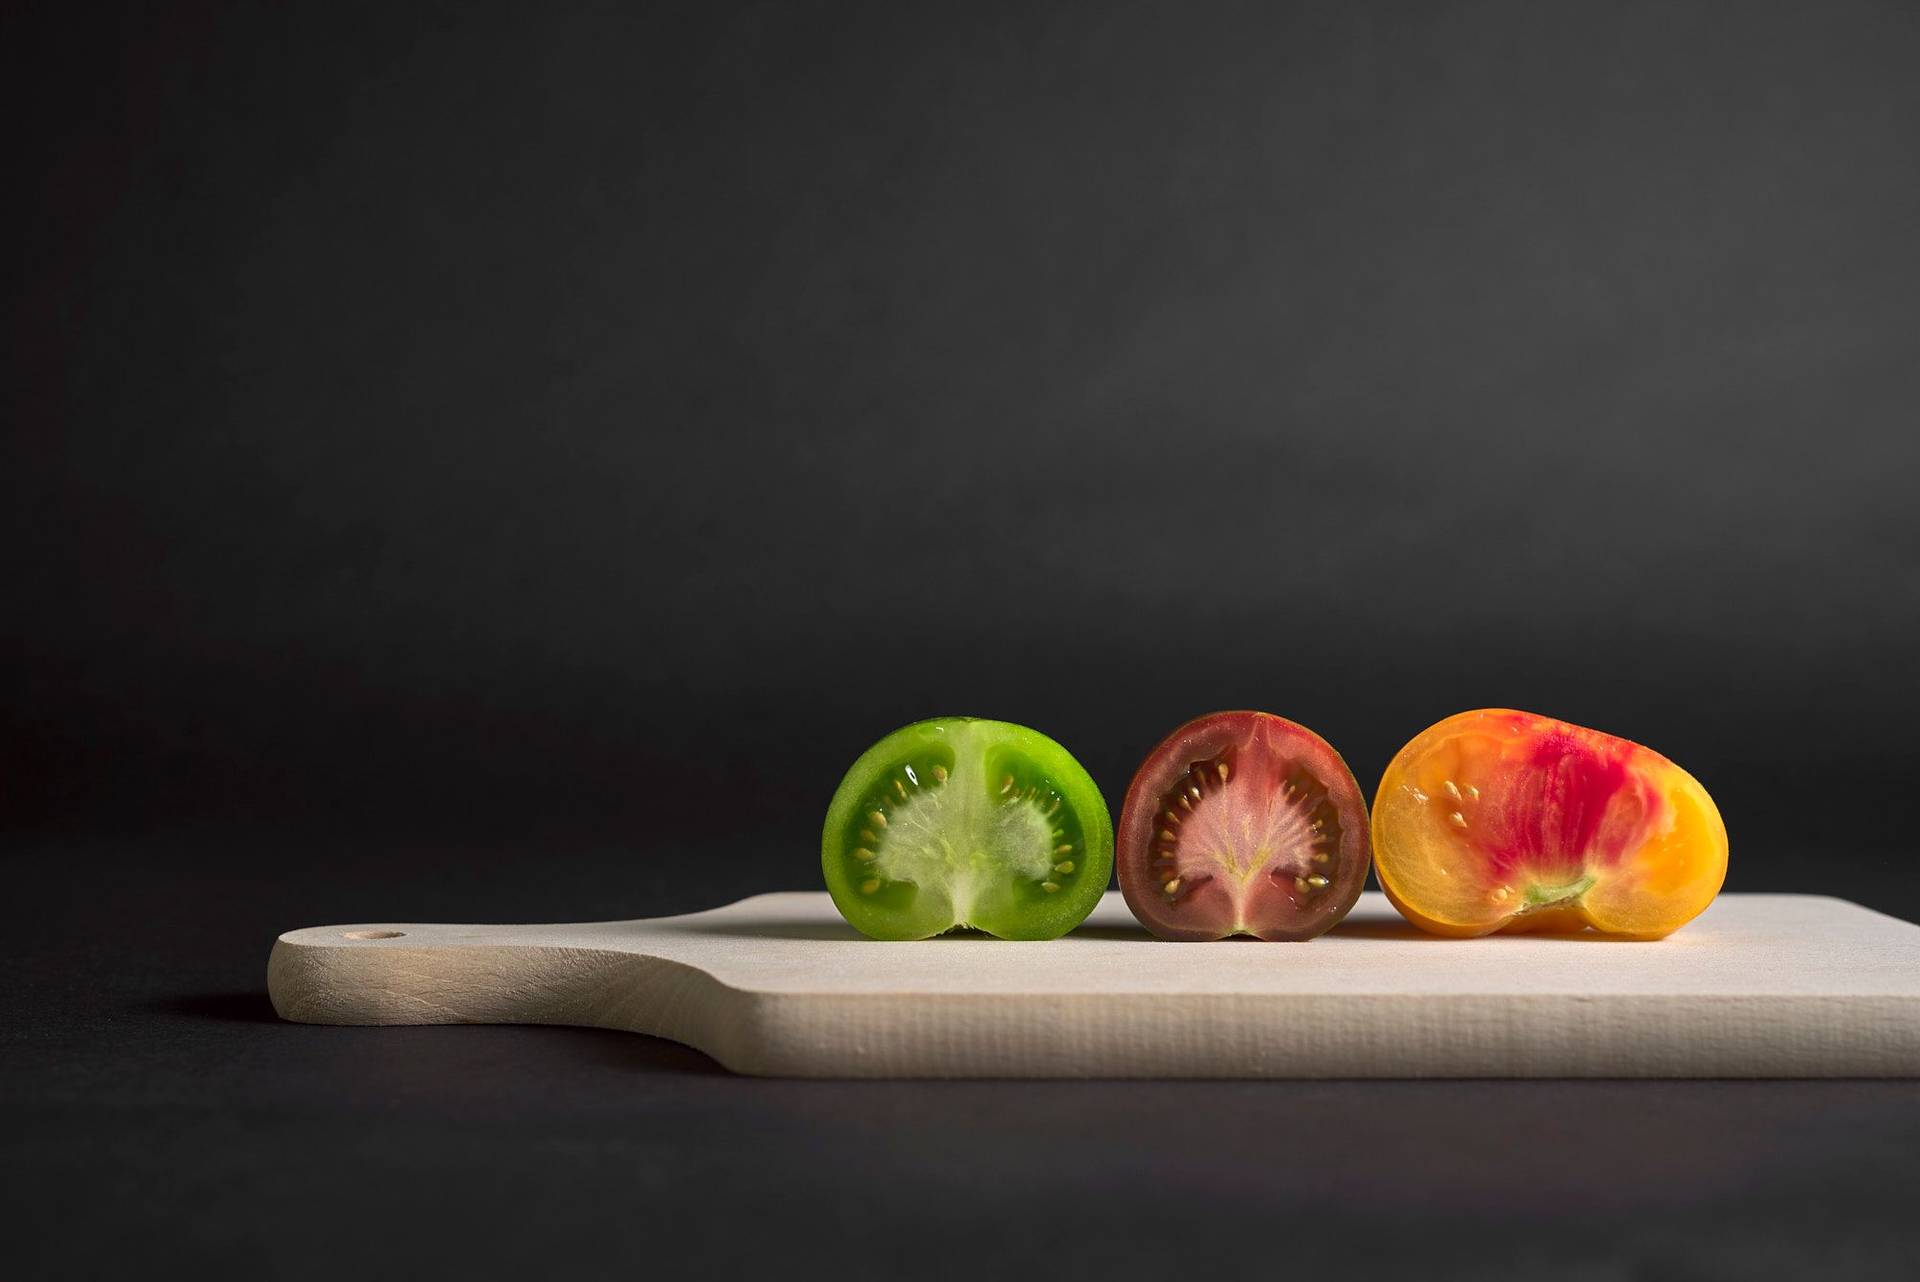 three different colored tomatoes on a wooden board with black background